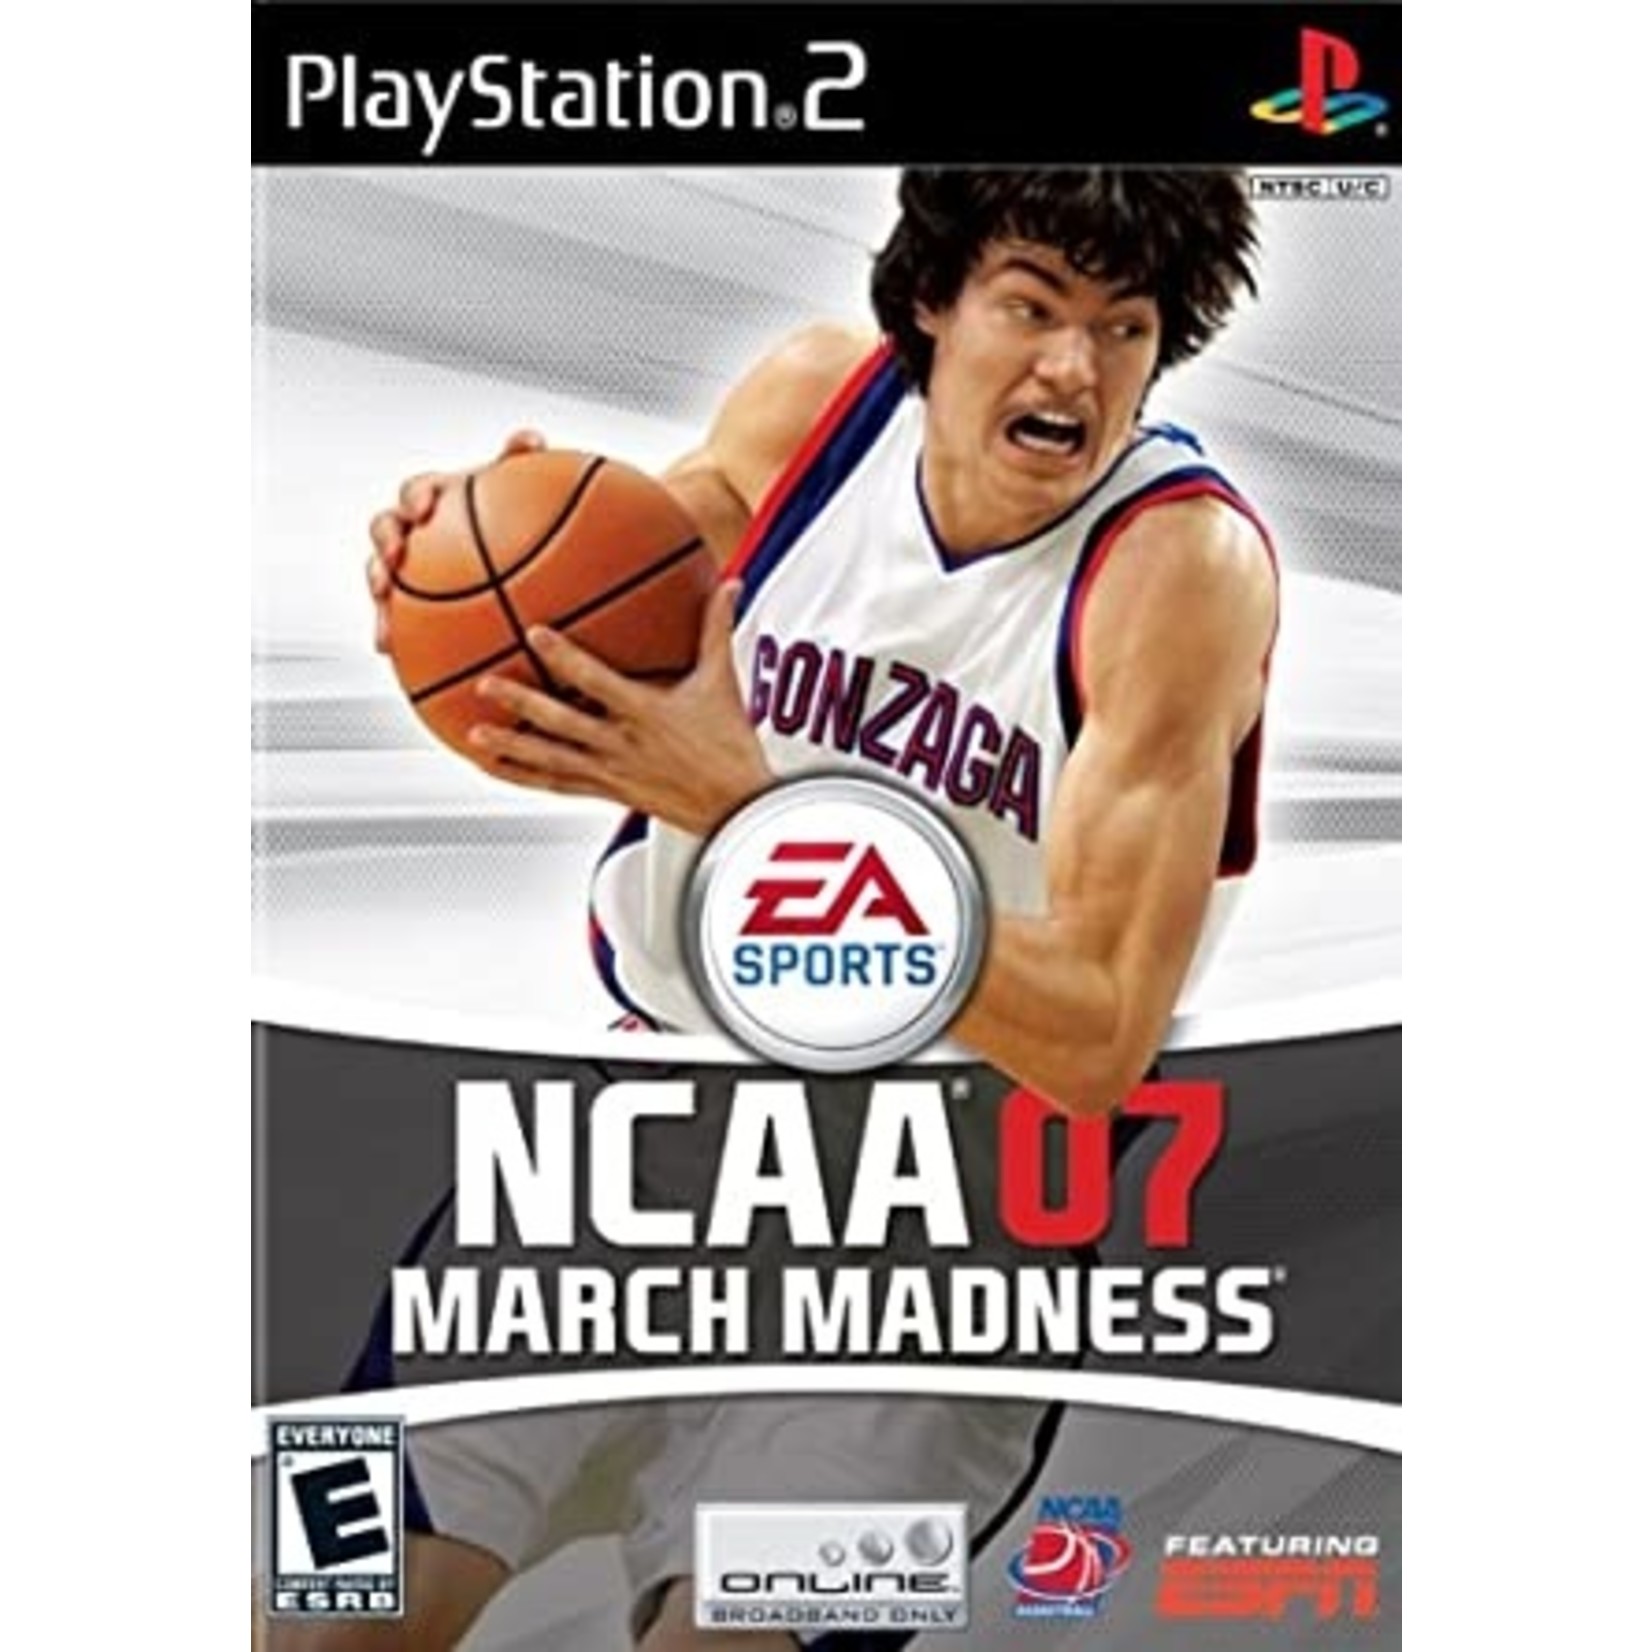 PS2-MARCH MADNESS 07